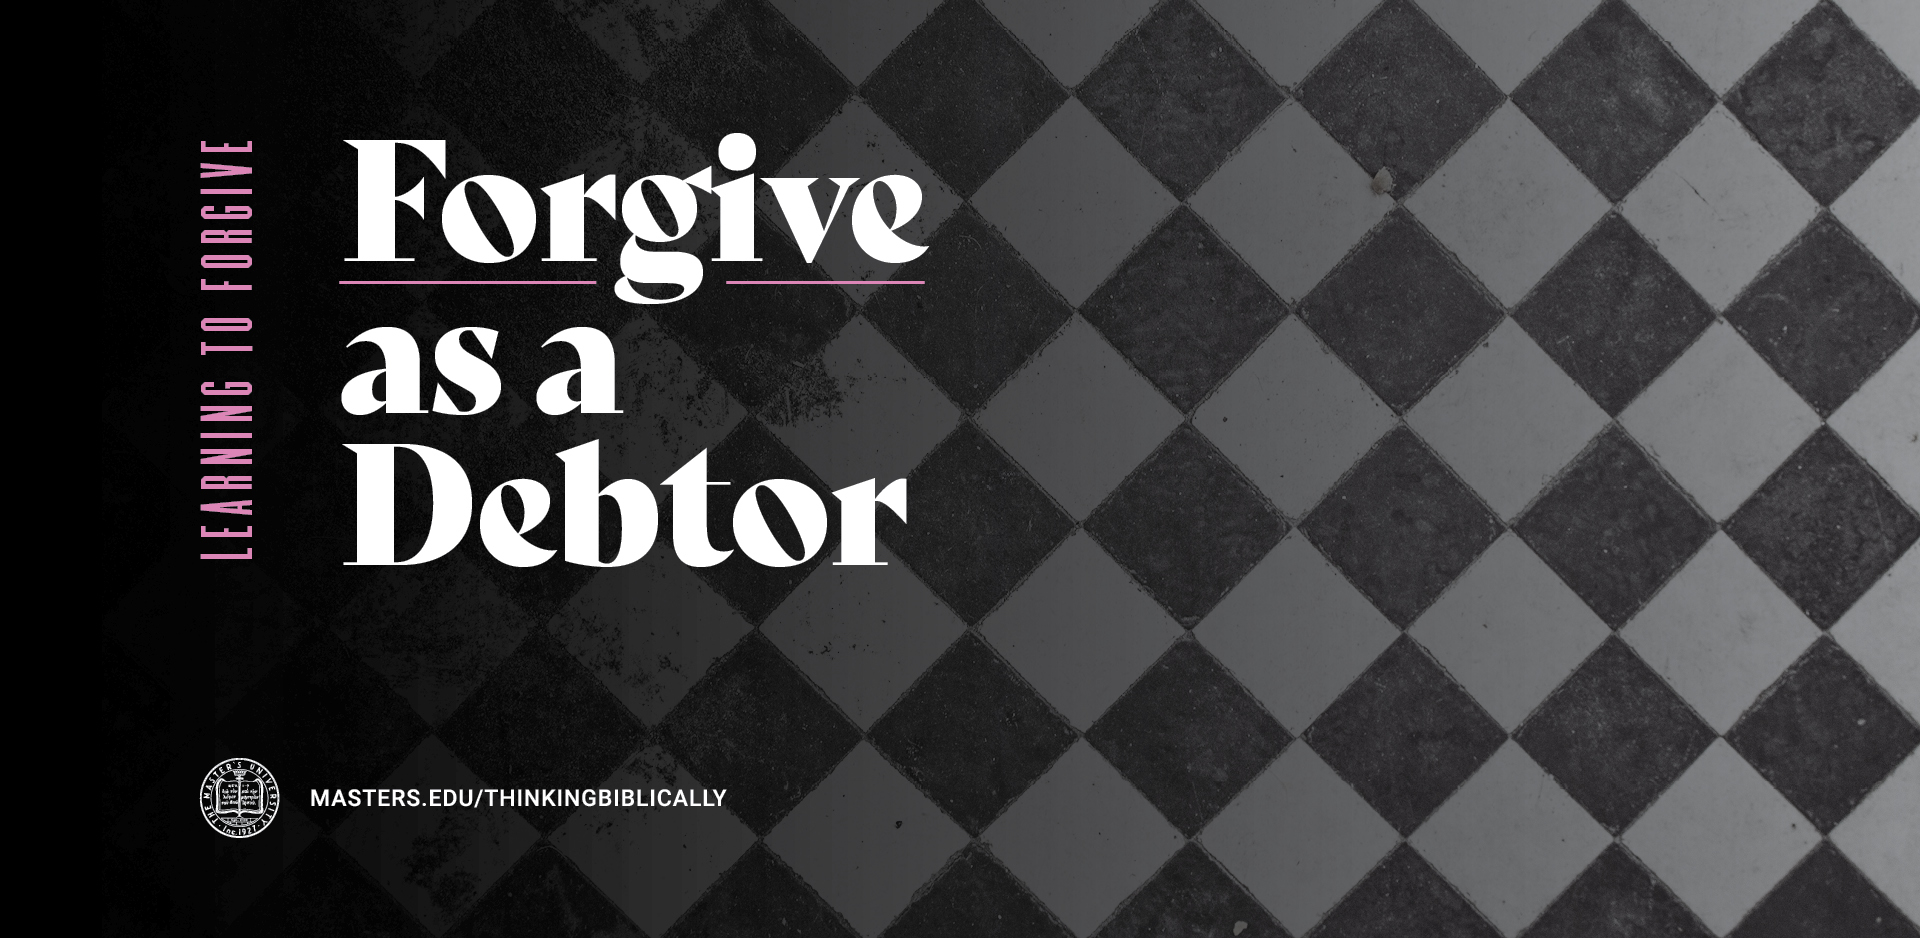 Forgive as a Debtor Featured Image